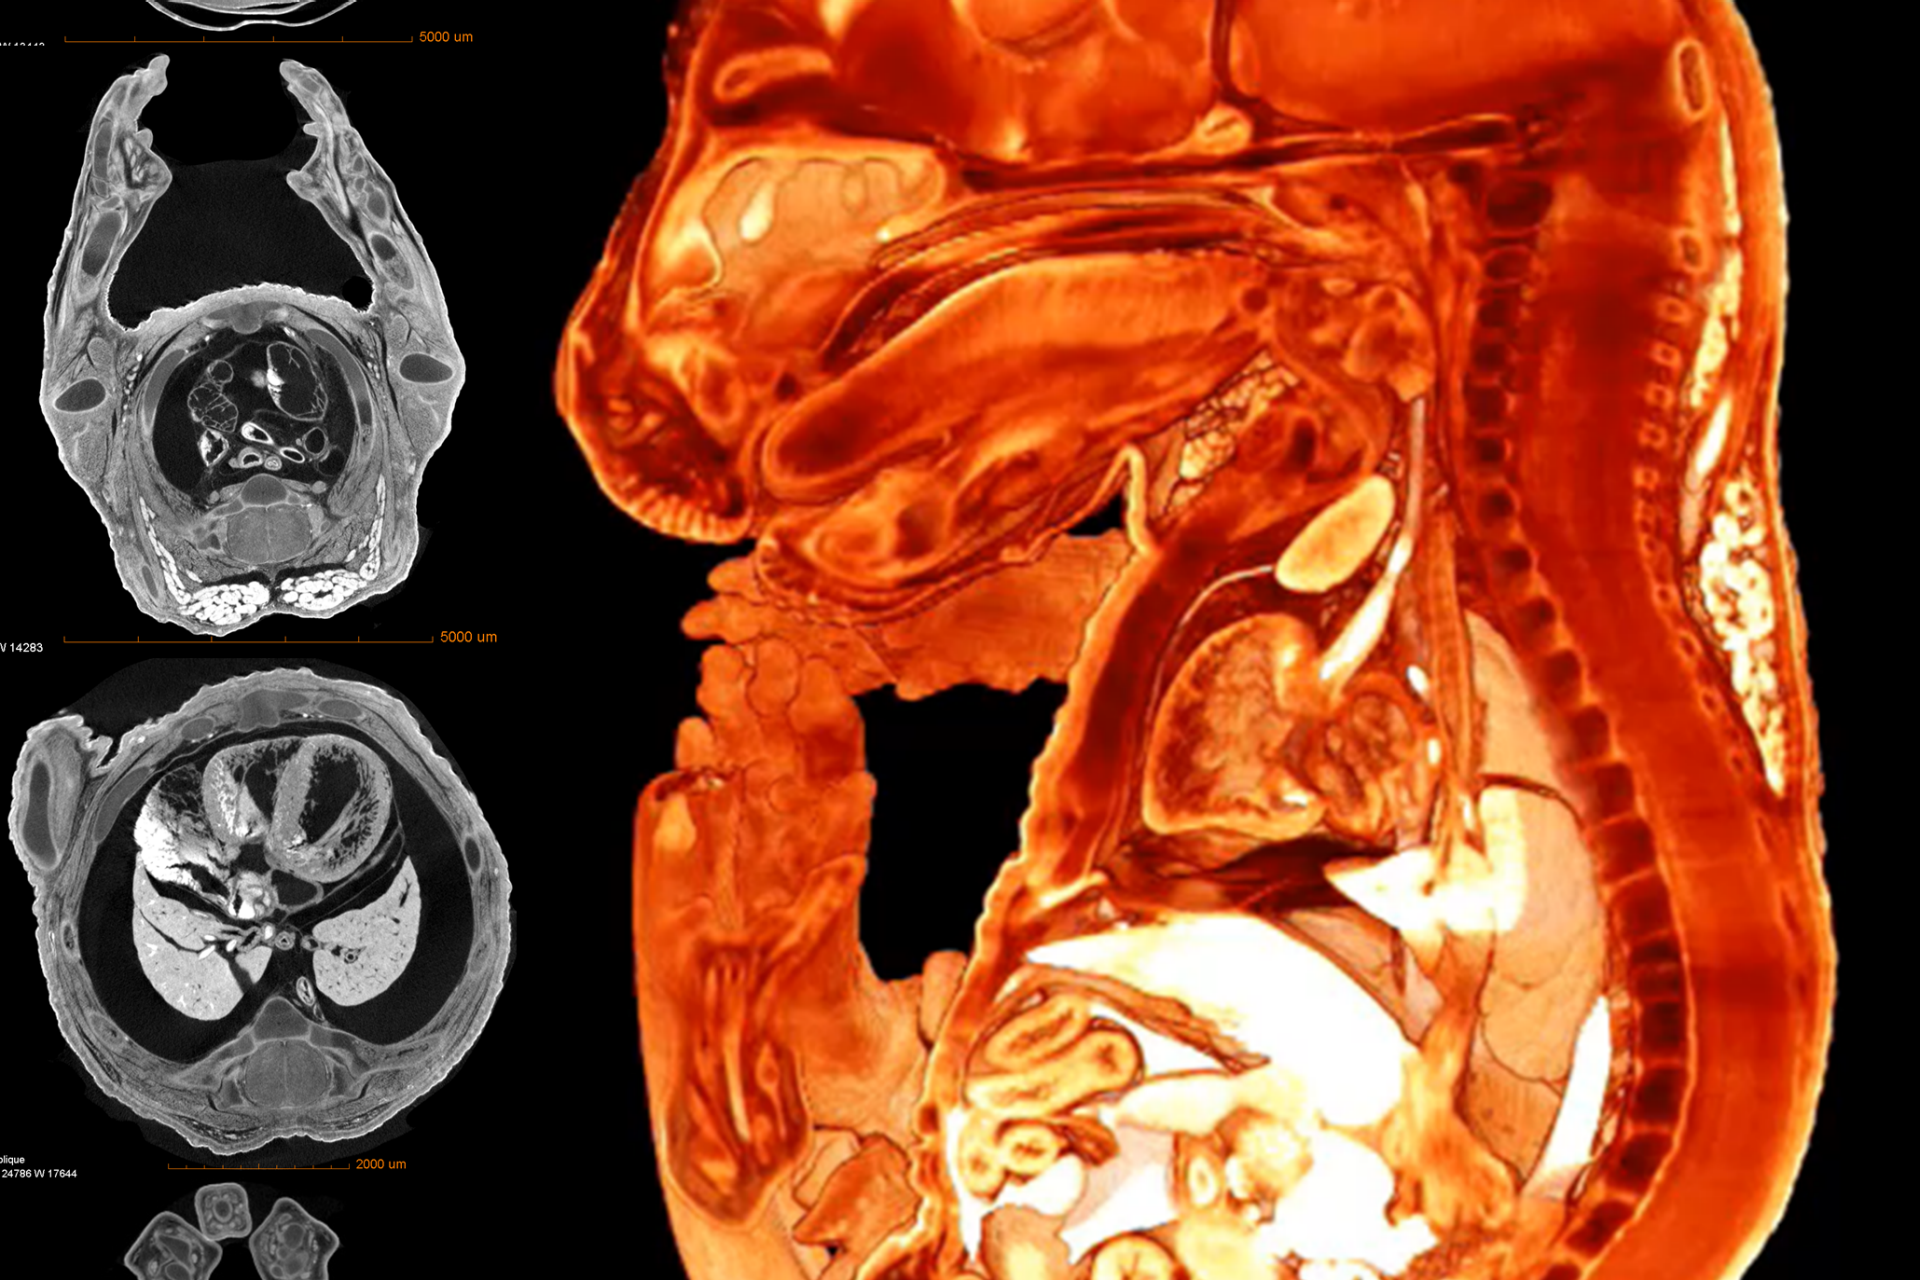 Mouse embryo imaged with Xradia Versa XRM to show internal structures.